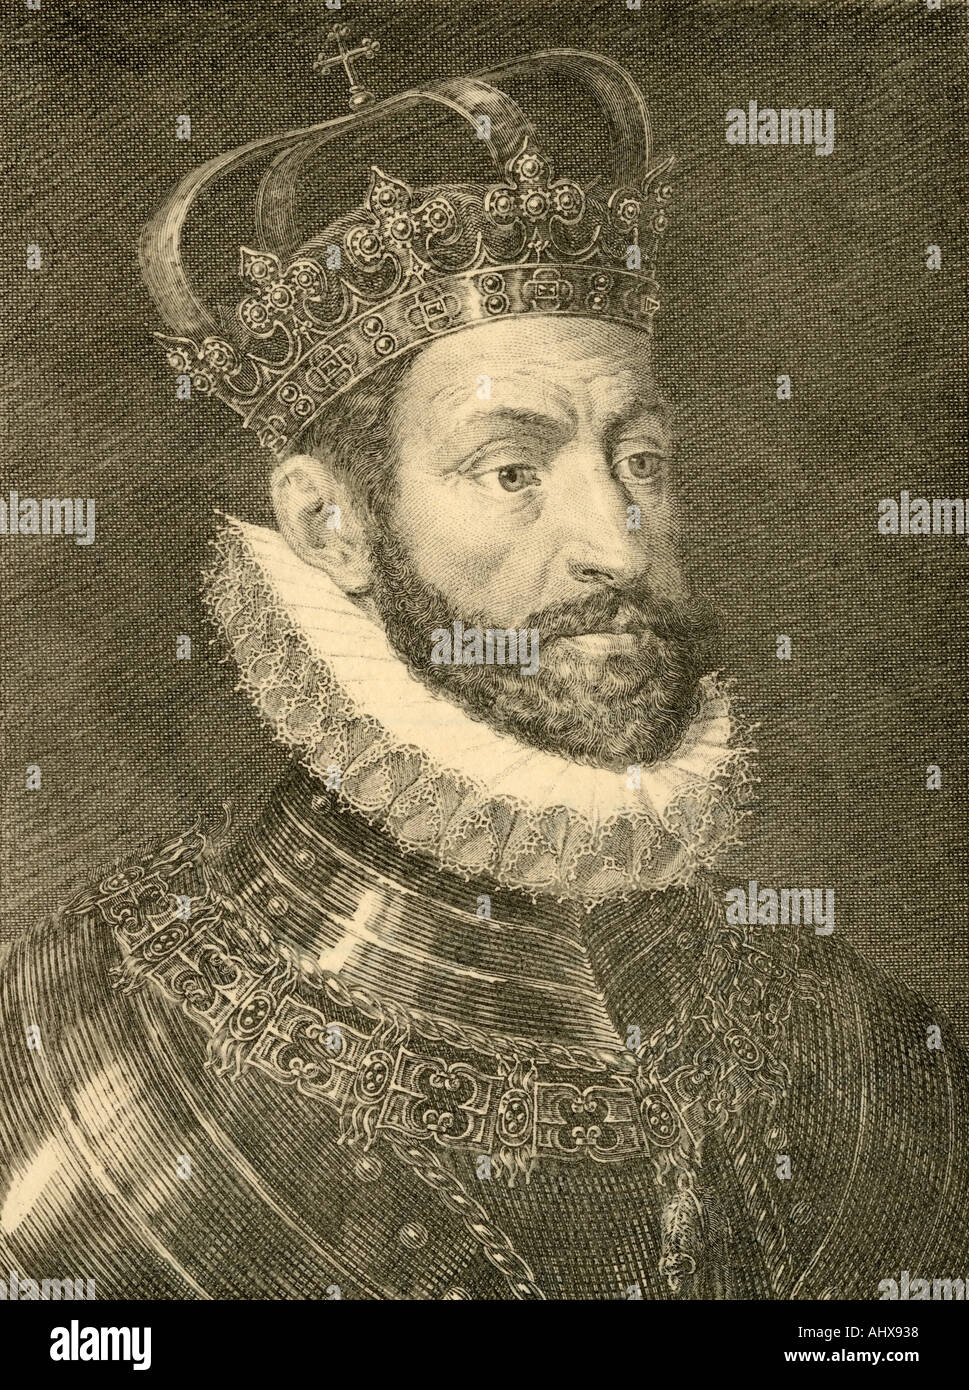 Holy Roman Emperor 1519 to 1558 and as Charles I - charles-v-1500-to-1558-holy-roman-emperor-1519-to-1558-and-as-charles-AHX938